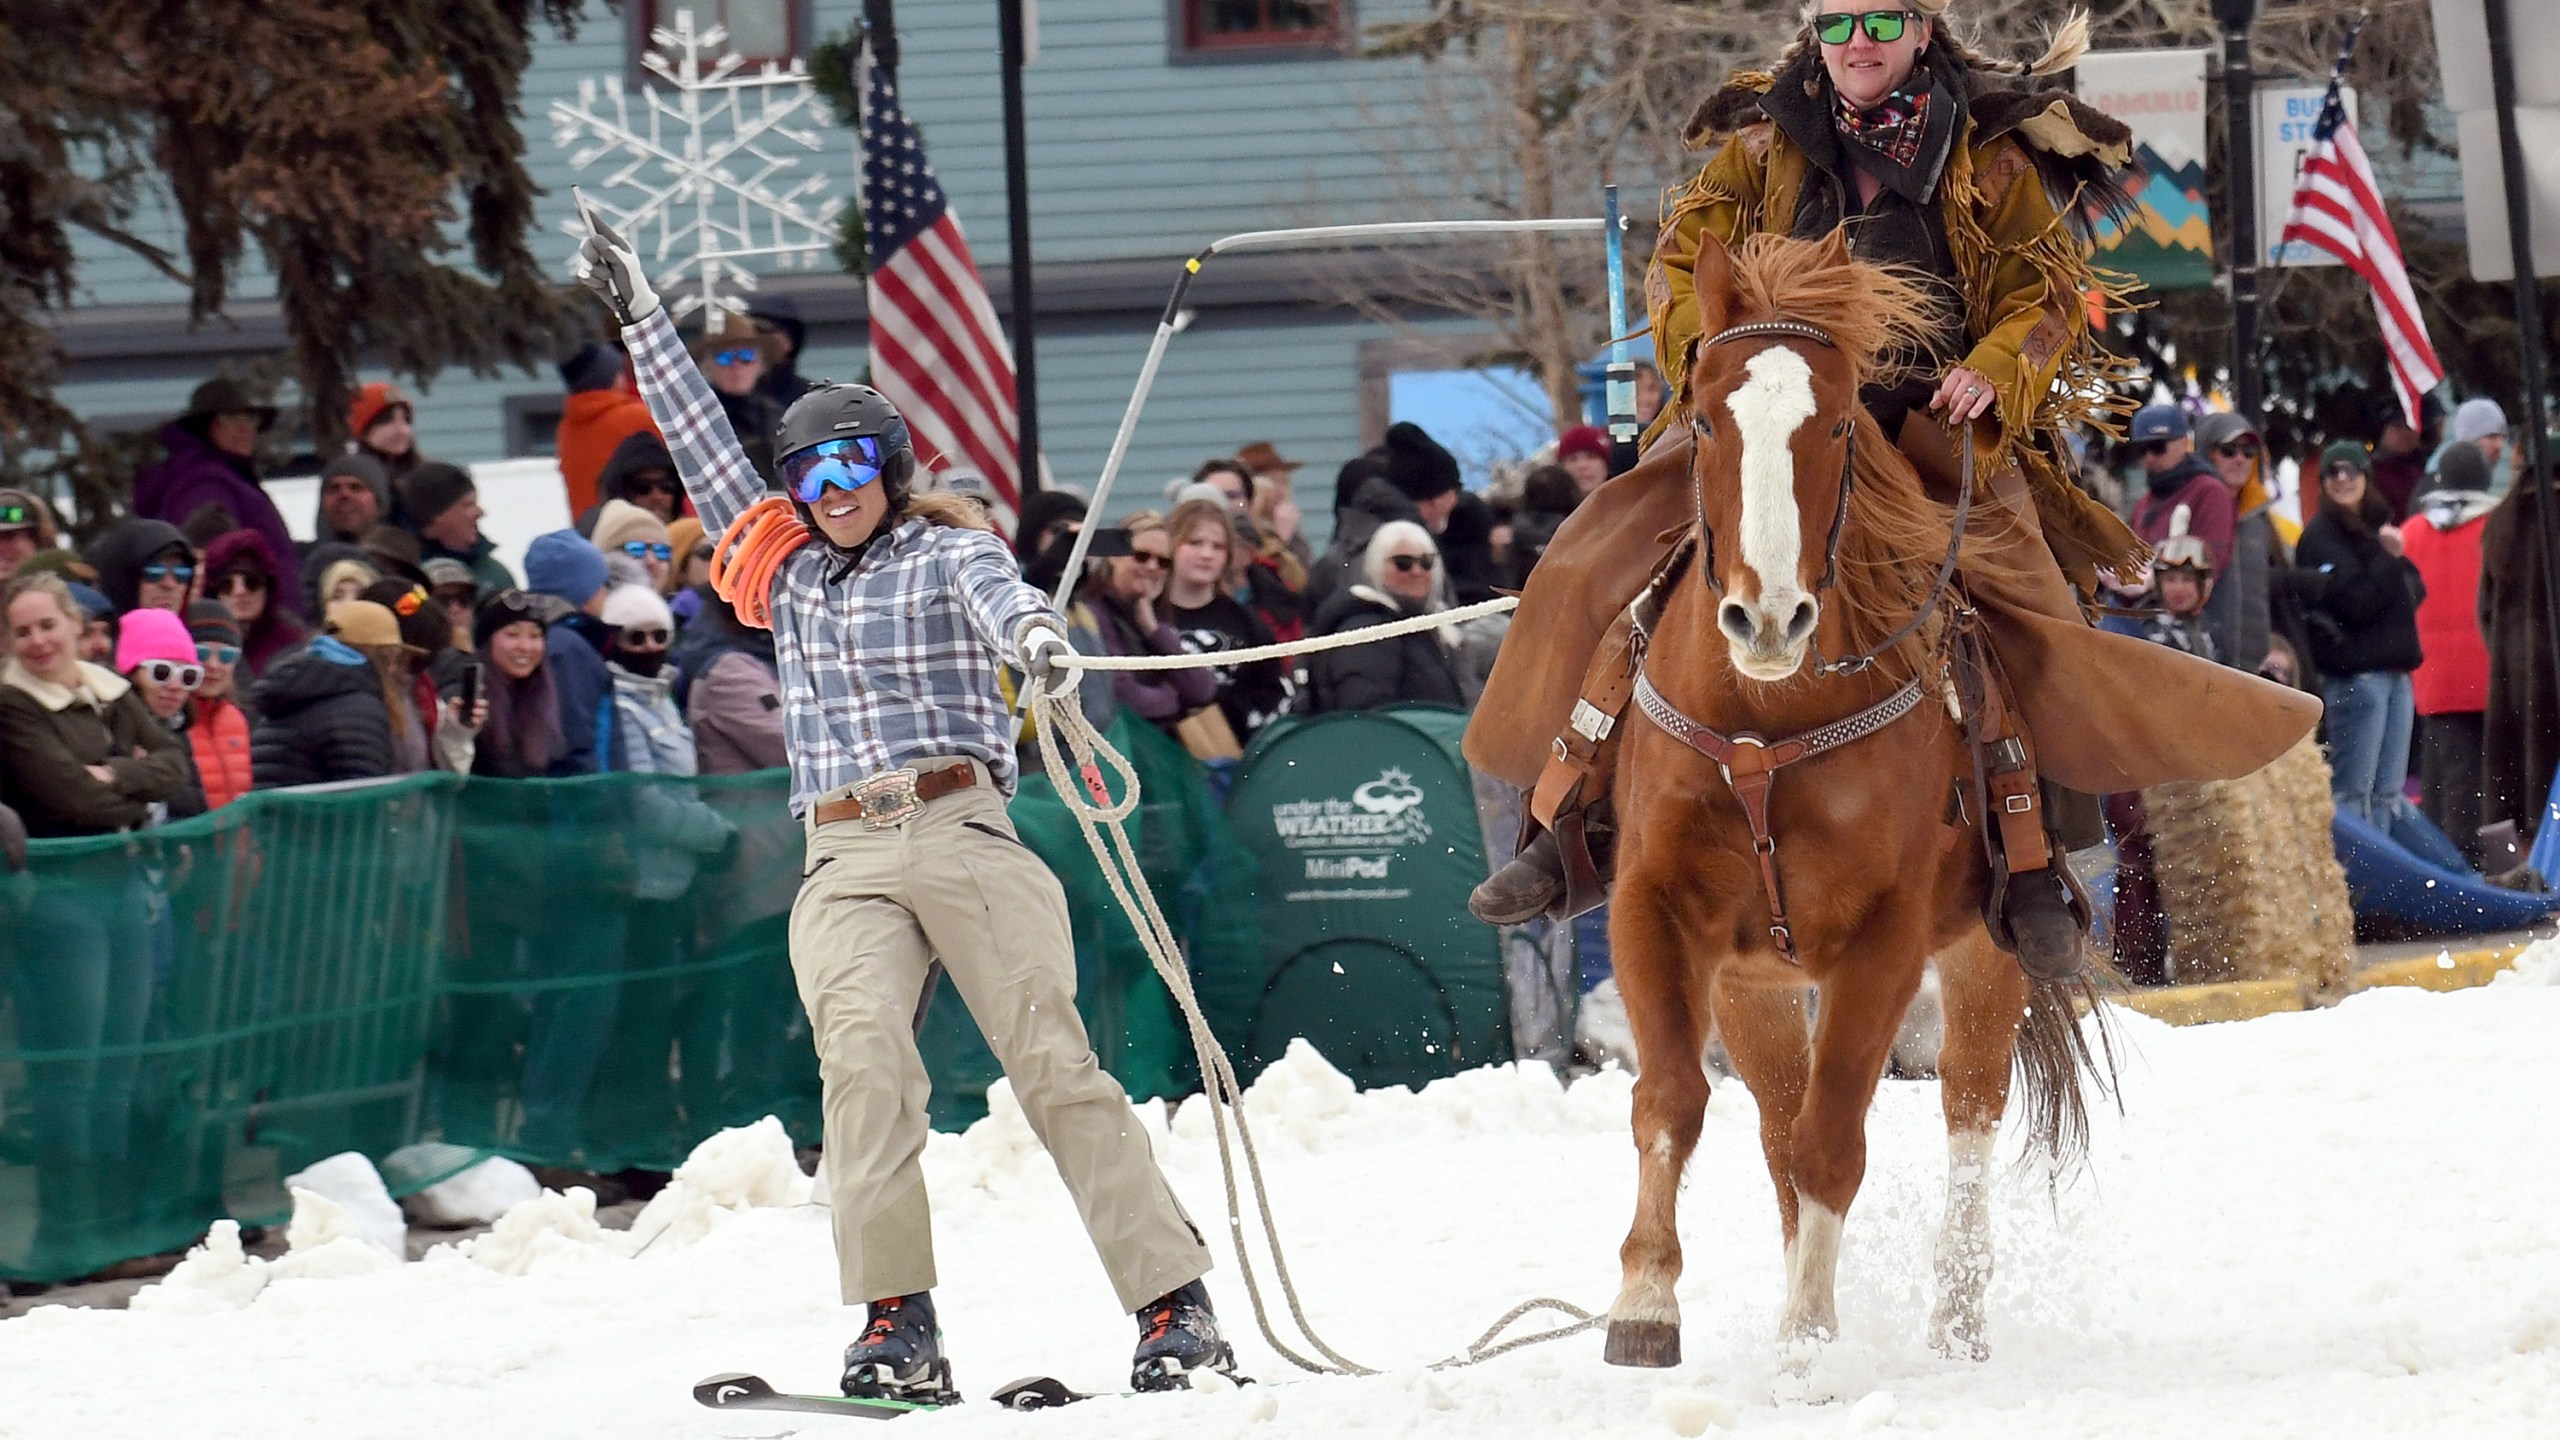 A skijoring team competes in Leadville, Colo., on Saturday, March 2, 2024. Skijoring draws its name from the Norwegian word skikjoring, meaning "ski driving." It started as a practical mode of transportation in Scandinavia and became popular in the Alps around 1900. Today's sport features horses at full gallop towing skiers by rope over jumps and around obstacles as they try to lance suspended hoops with a baton, typically a ski pole that's cut in half. (AP Photo/Thomas Peipert)